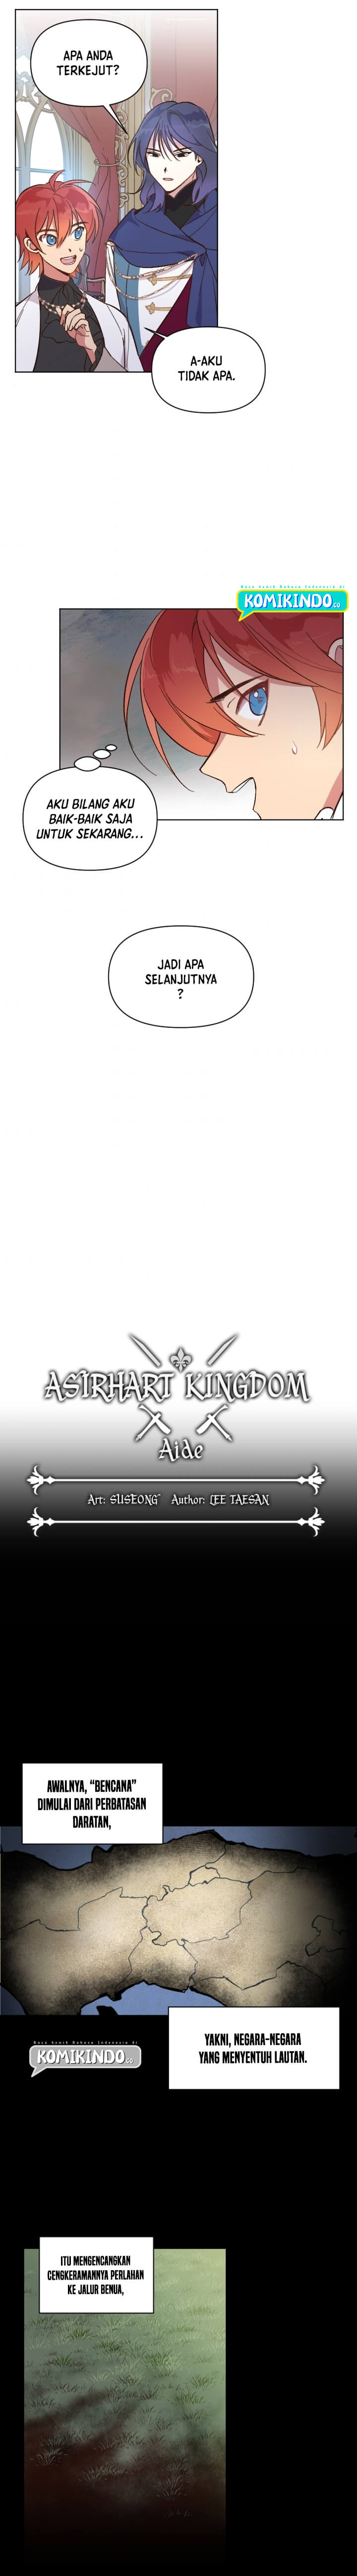 Asirhart Kingdom Aide Chapter 08